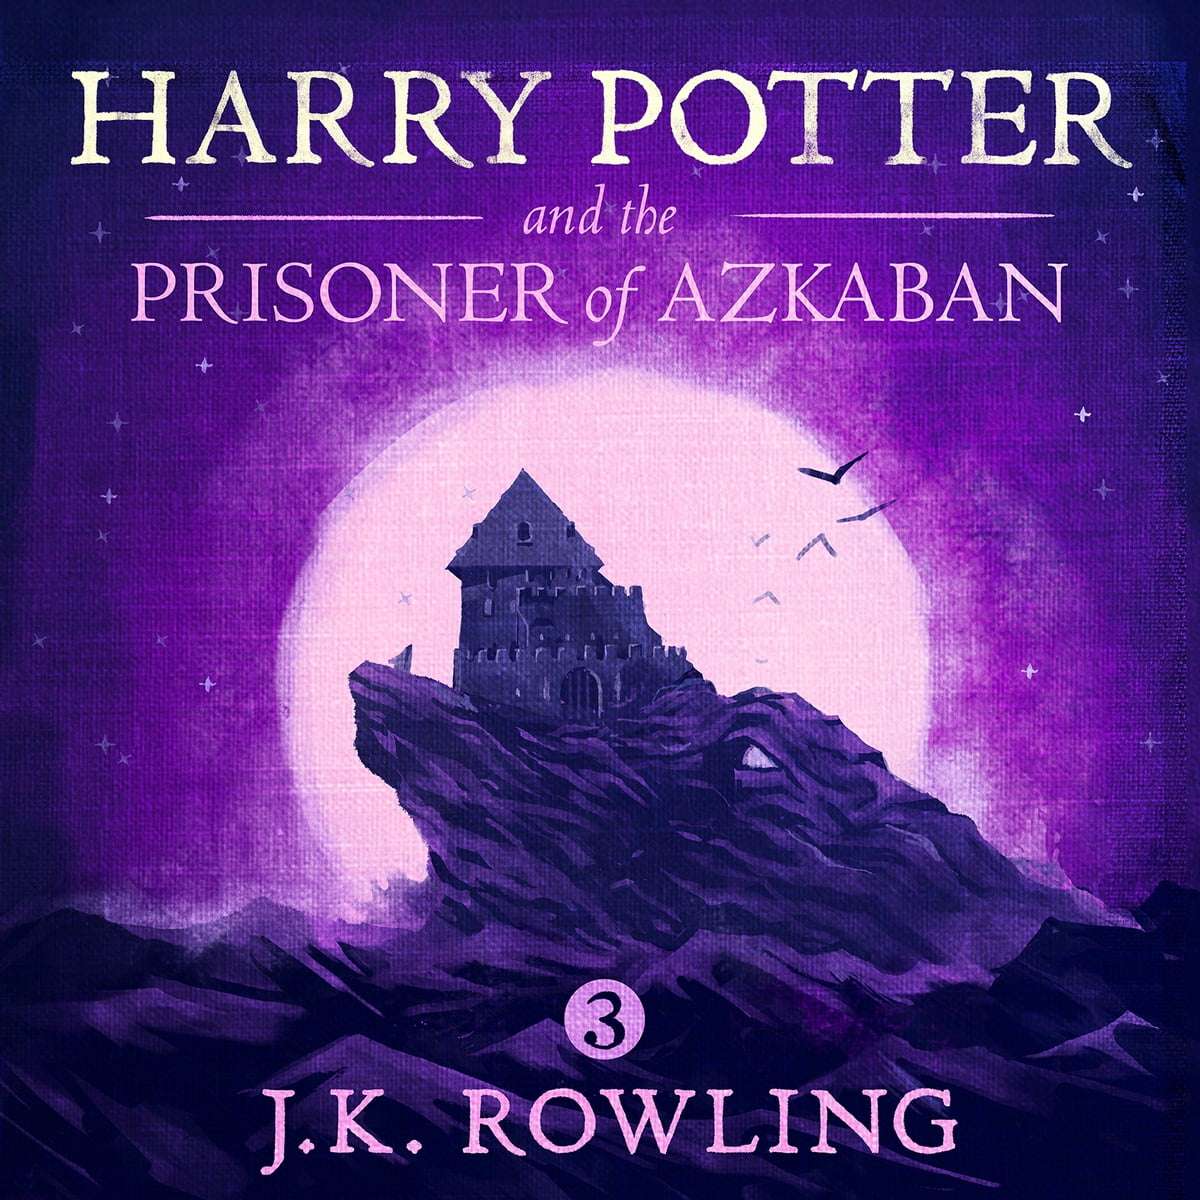 Harry Potter and the Prisoner of Azkaban Audiobook by J.K. Rowling ...